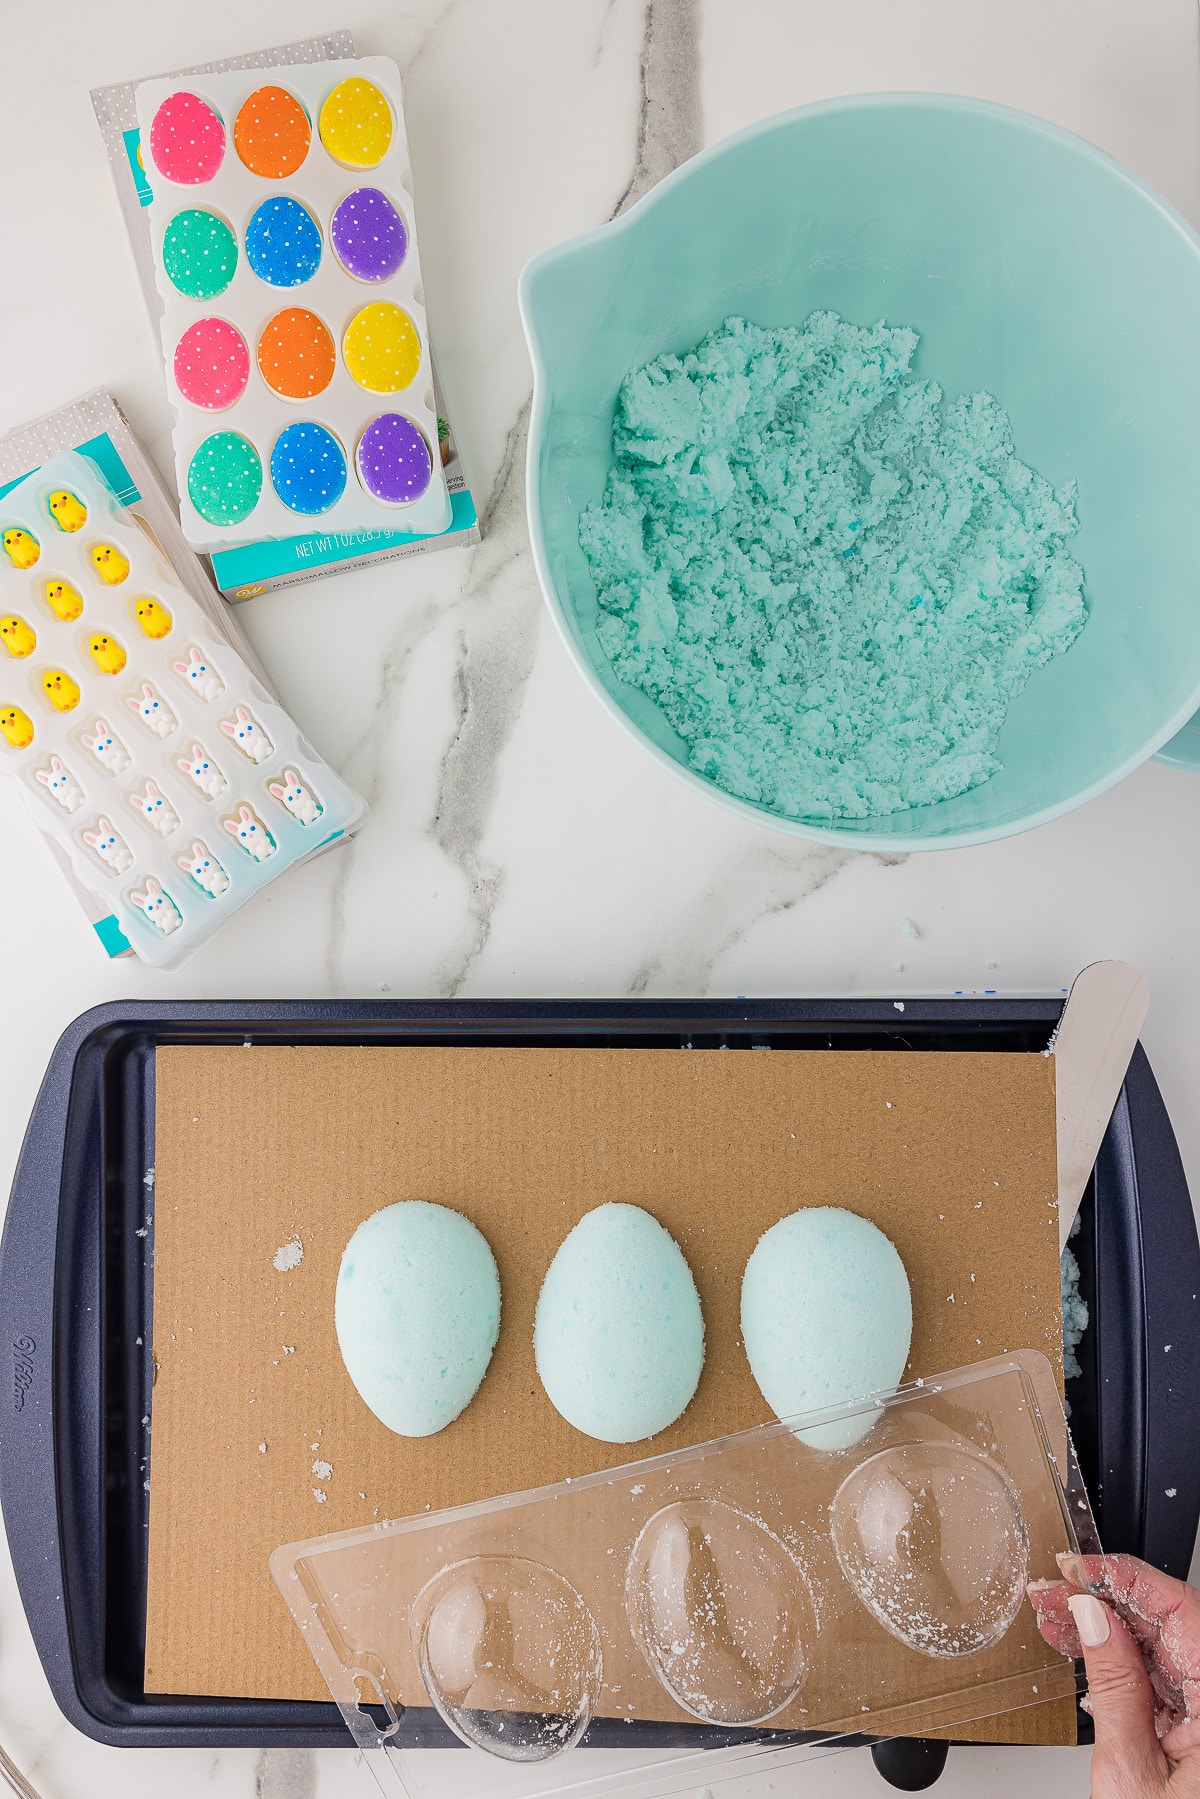 Sugar eggs and molds on a baking sheet with Easter candy decorations